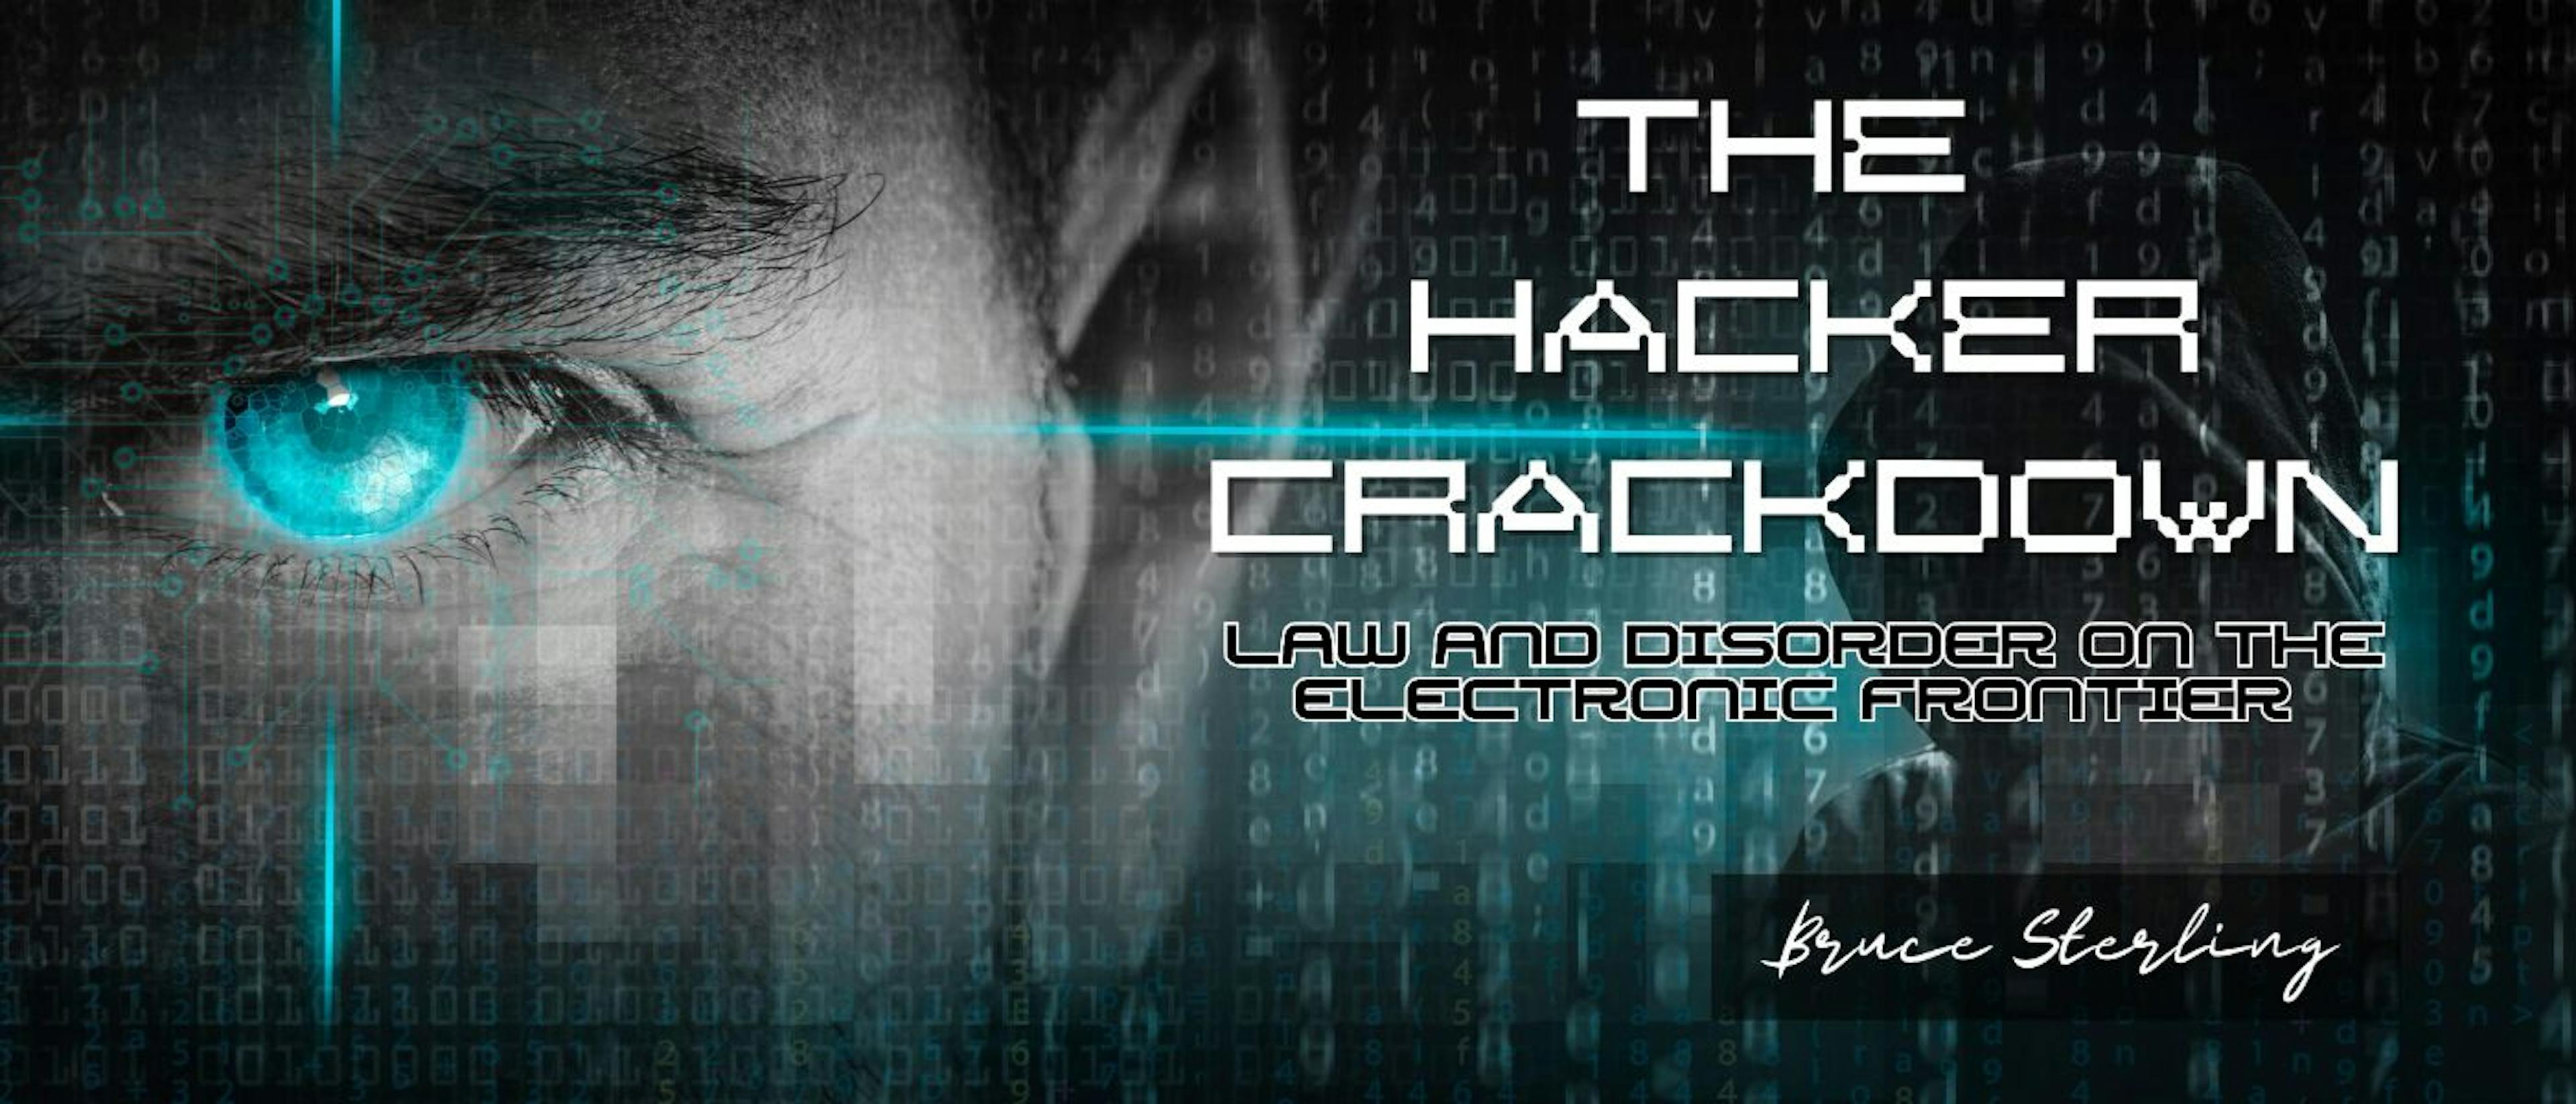 featured image - The Hacker Crackdown: Law and Disorder on the Electronic Frontier by Bruce Sterling - Table of Links